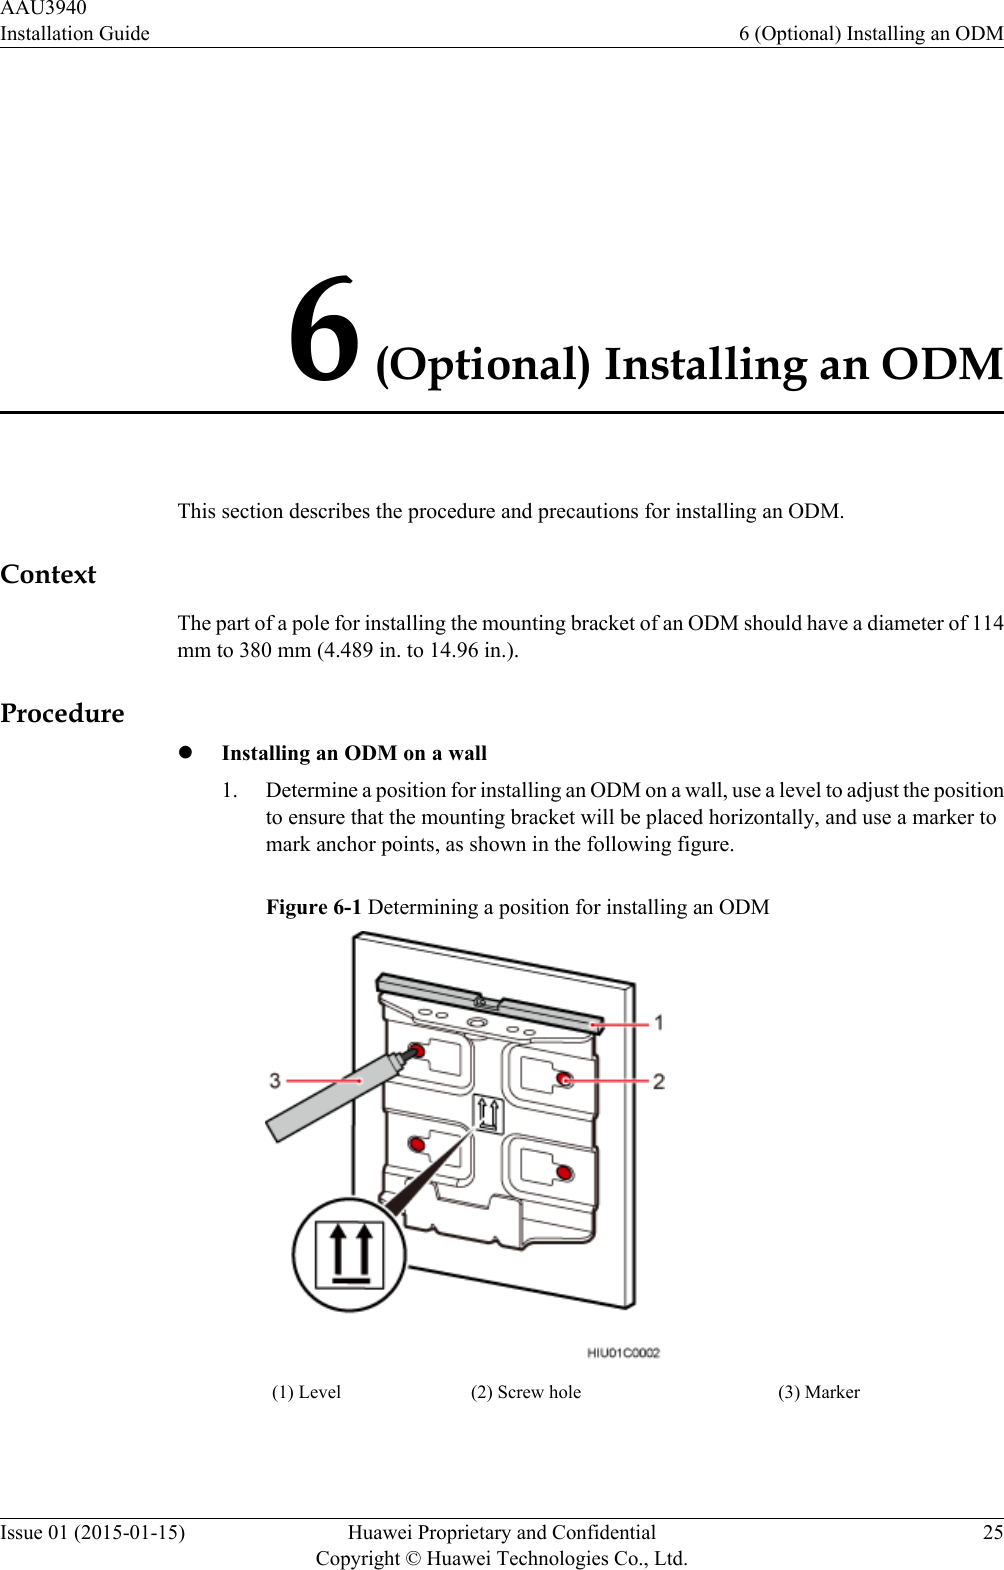 6 (Optional) Installing an ODMThis section describes the procedure and precautions for installing an ODM.ContextThe part of a pole for installing the mounting bracket of an ODM should have a diameter of 114mm to 380 mm (4.489 in. to 14.96 in.).ProcedurelInstalling an ODM on a wall1. Determine a position for installing an ODM on a wall, use a level to adjust the positionto ensure that the mounting bracket will be placed horizontally, and use a marker tomark anchor points, as shown in the following figure.Figure 6-1 Determining a position for installing an ODM(1) Level (2) Screw hole (3) Marker AAU3940Installation Guide 6 (Optional) Installing an ODMIssue 01 (2015-01-15) Huawei Proprietary and ConfidentialCopyright © Huawei Technologies Co., Ltd.25